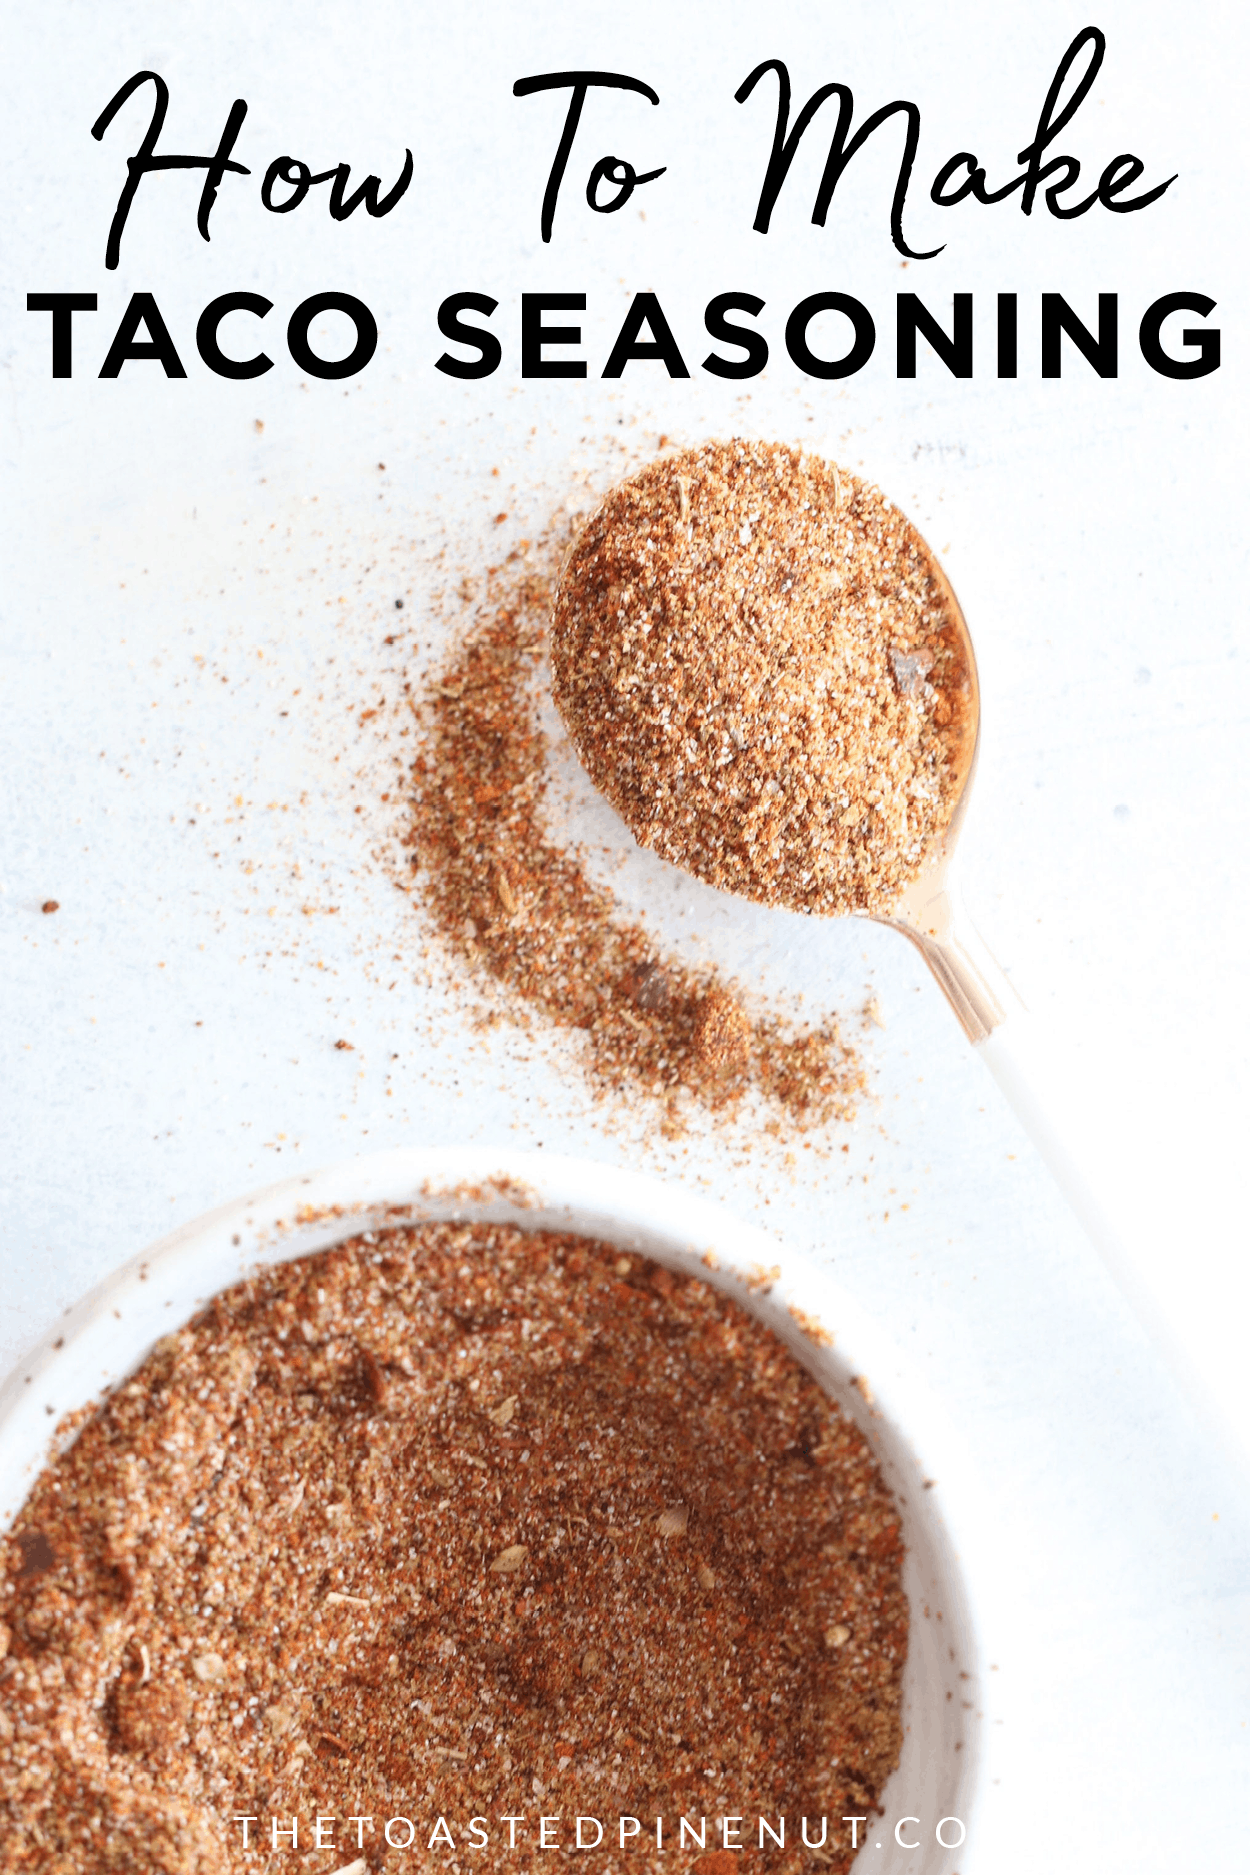 Ditch store bought taco seasoning packets and make your own! Enjoy this super fun and easy DIY homemade taco seasoning recipe! thetoastedpinenut.com #taco #tacoseasoning #healthy #diy #homemade #recipe